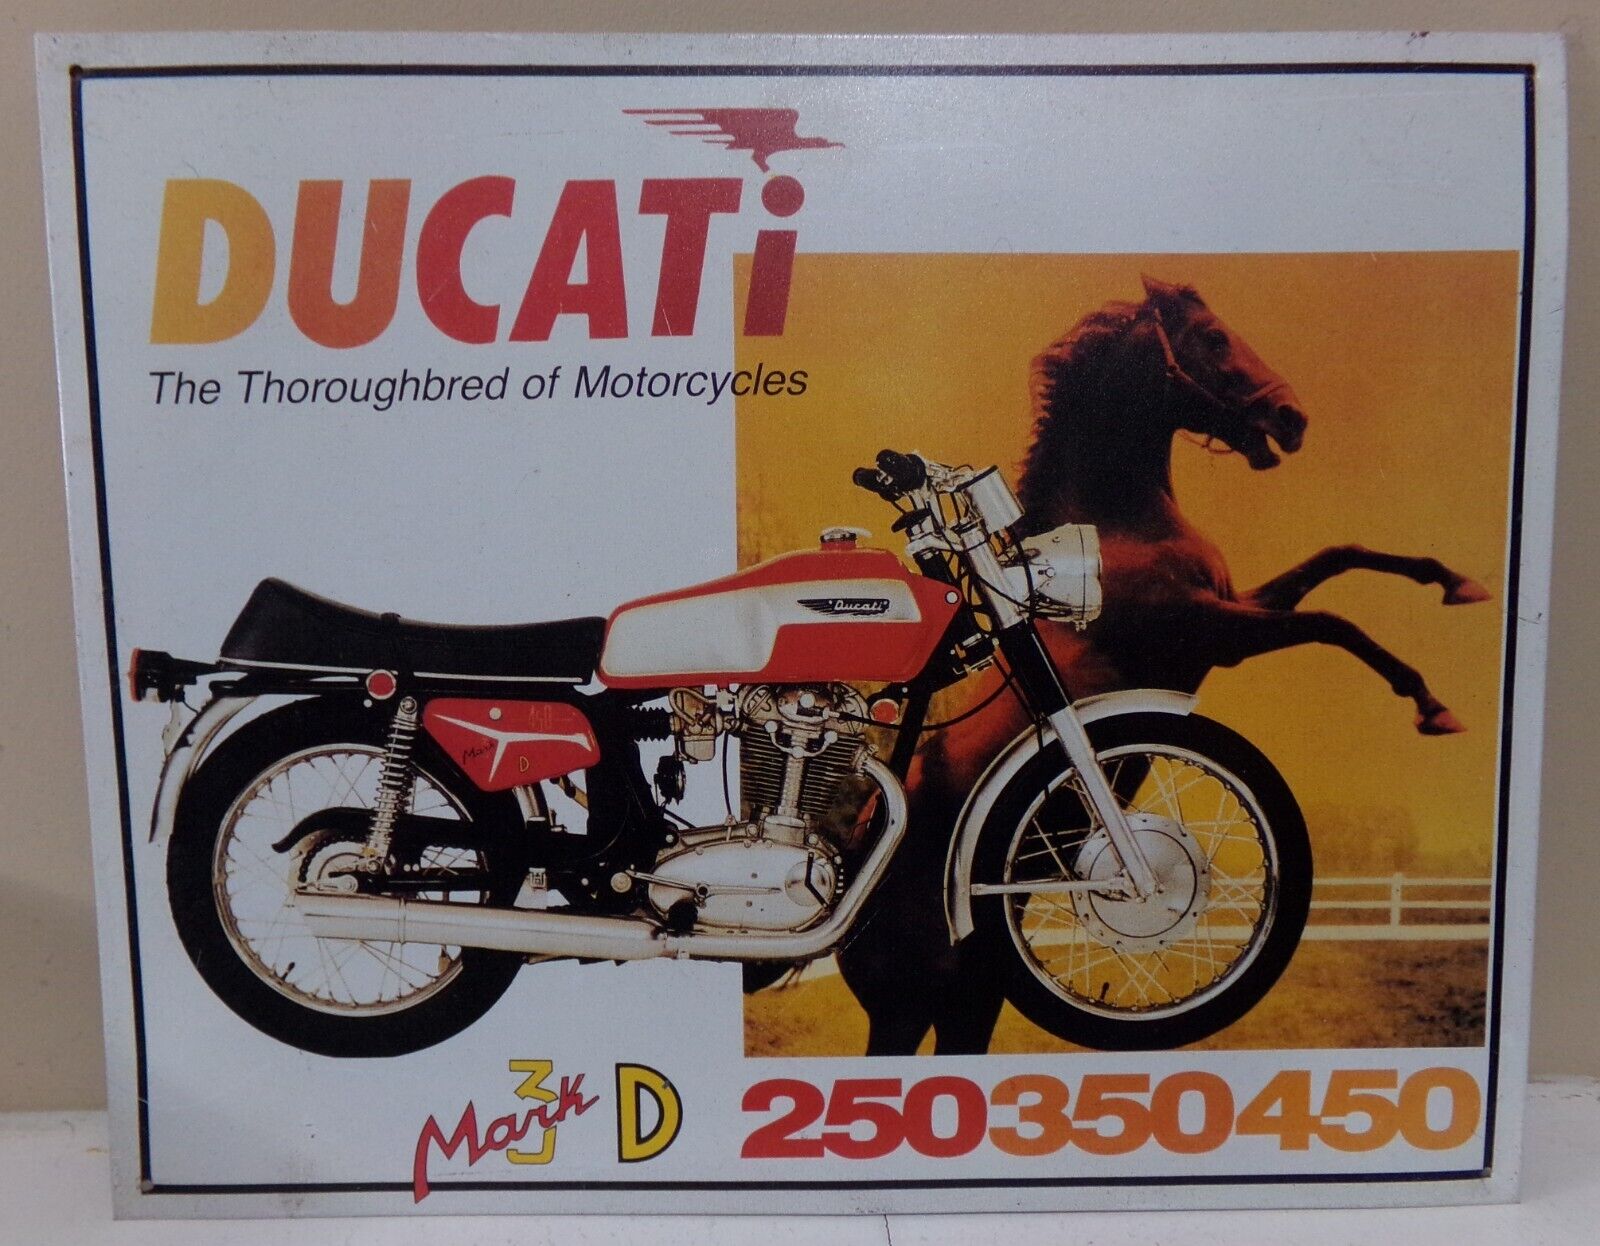 VINTAGE DUCATI THOROUGHBRED OF MOTORCYCLES MACK 3D 250 350 450 TIN SIGN 16X12.75